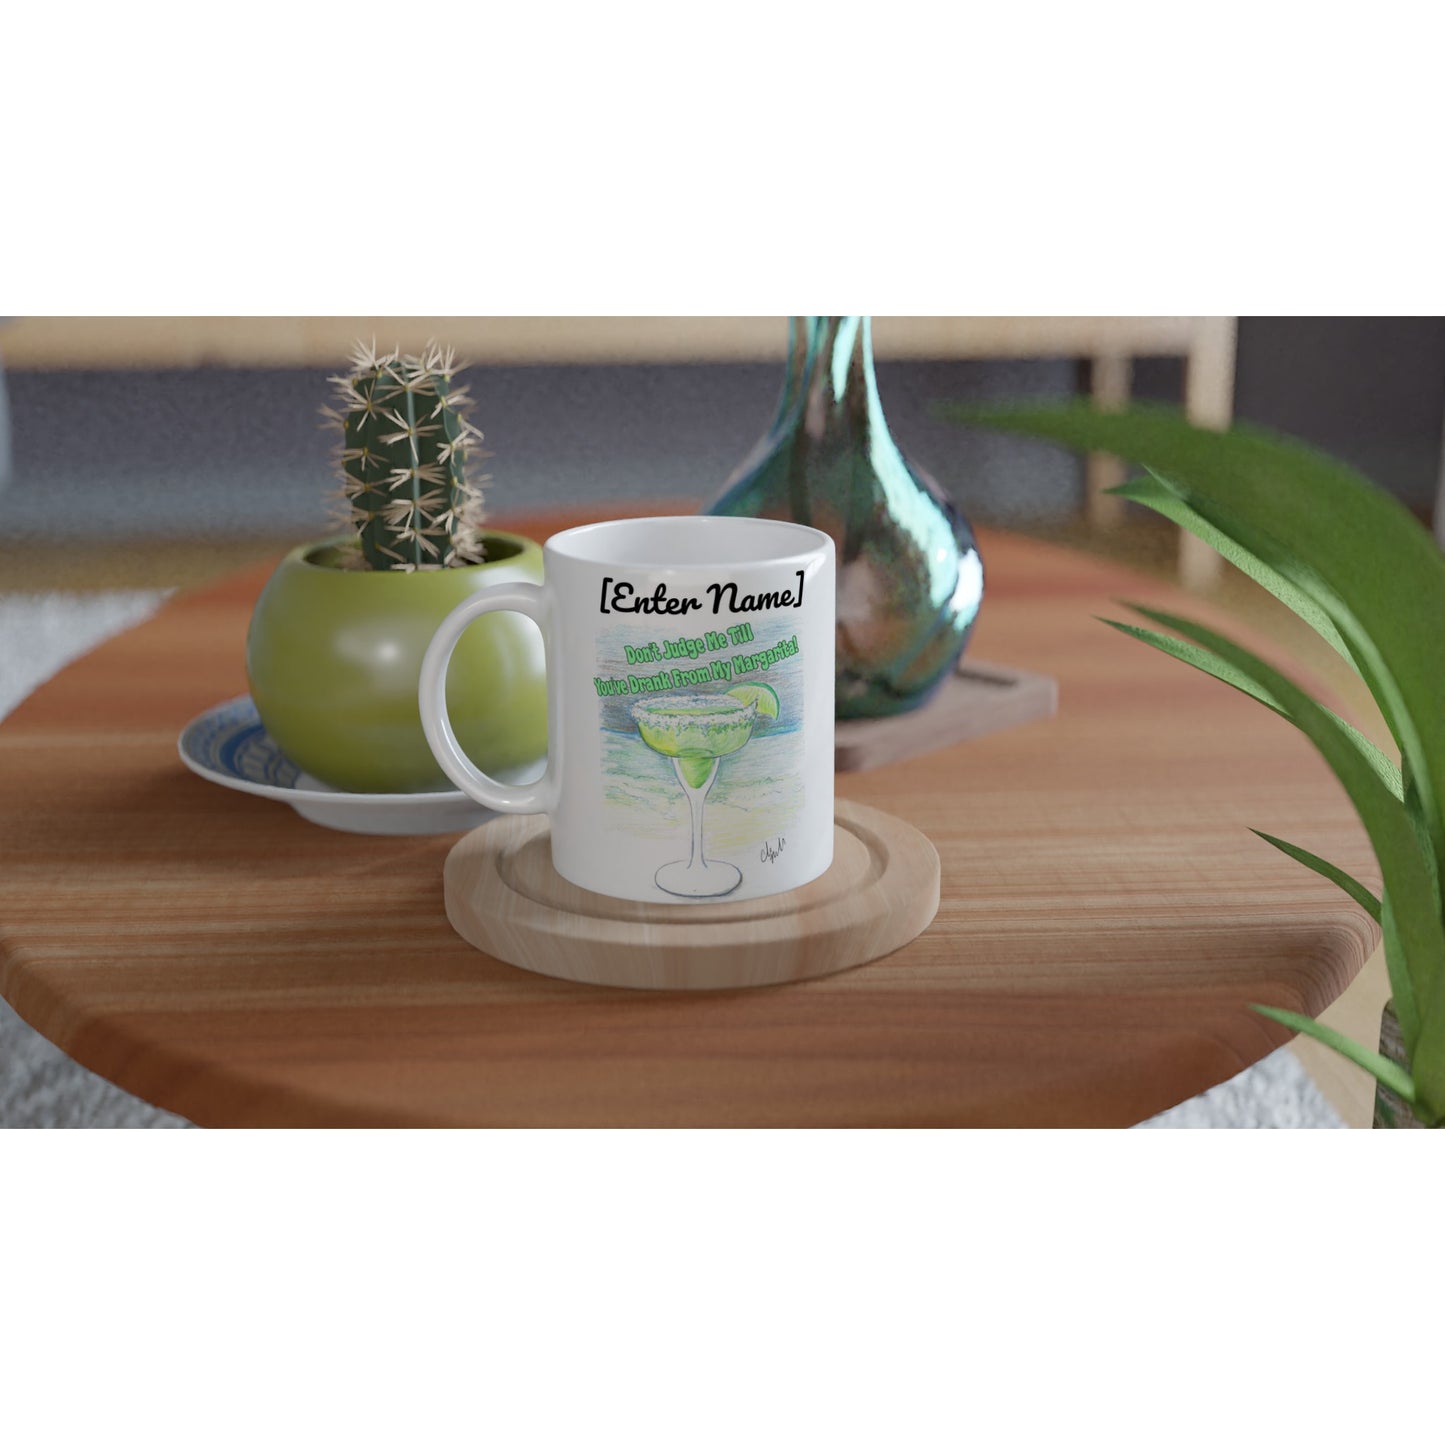 A personalized white ceramic 11oz mug with personalized original motto [Enter Name] Don’t Judge Me Till You’ve Drank From My Margarita on front and WhatYa Say logo on back dishwasher and microwave safe from WhatYa Say Apparel sitting on coaster on coffee table with green potted cactus and silver vase.